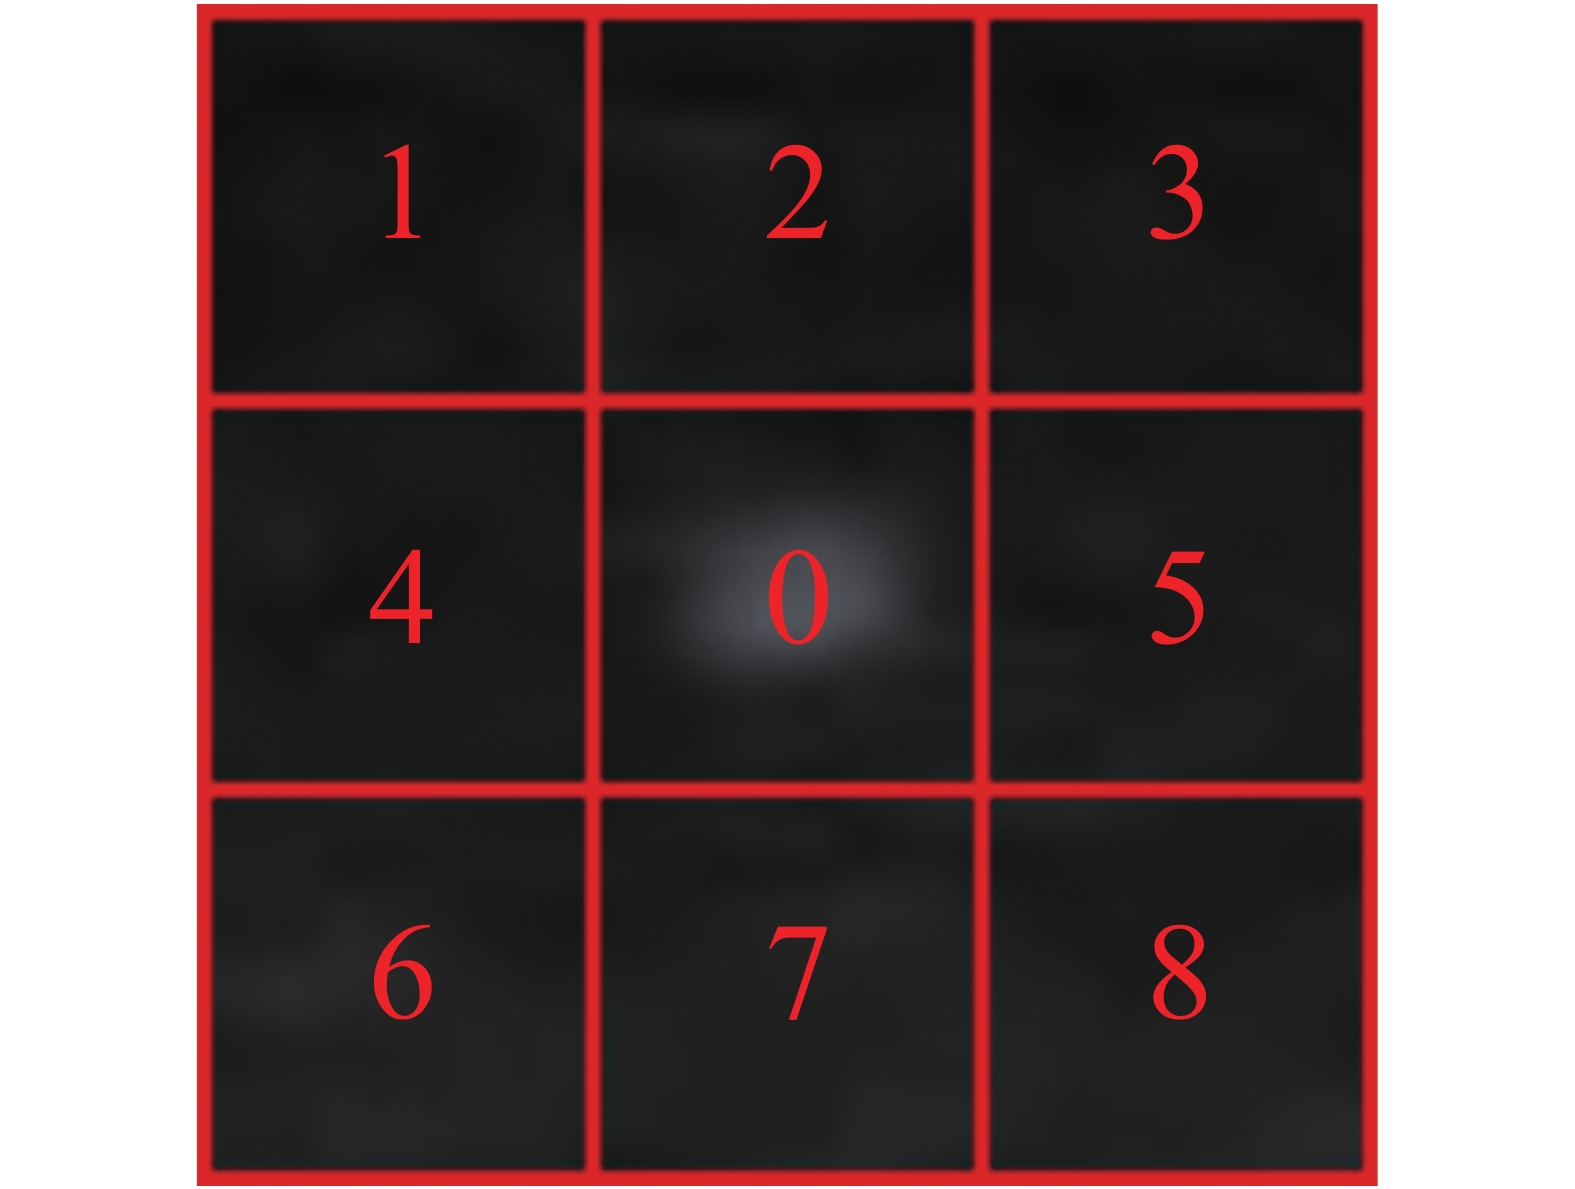 A local small image patch used for MRDLCM calculation. It is divided into 9 cells, and the cell size N should be close to or slightly larger than real target